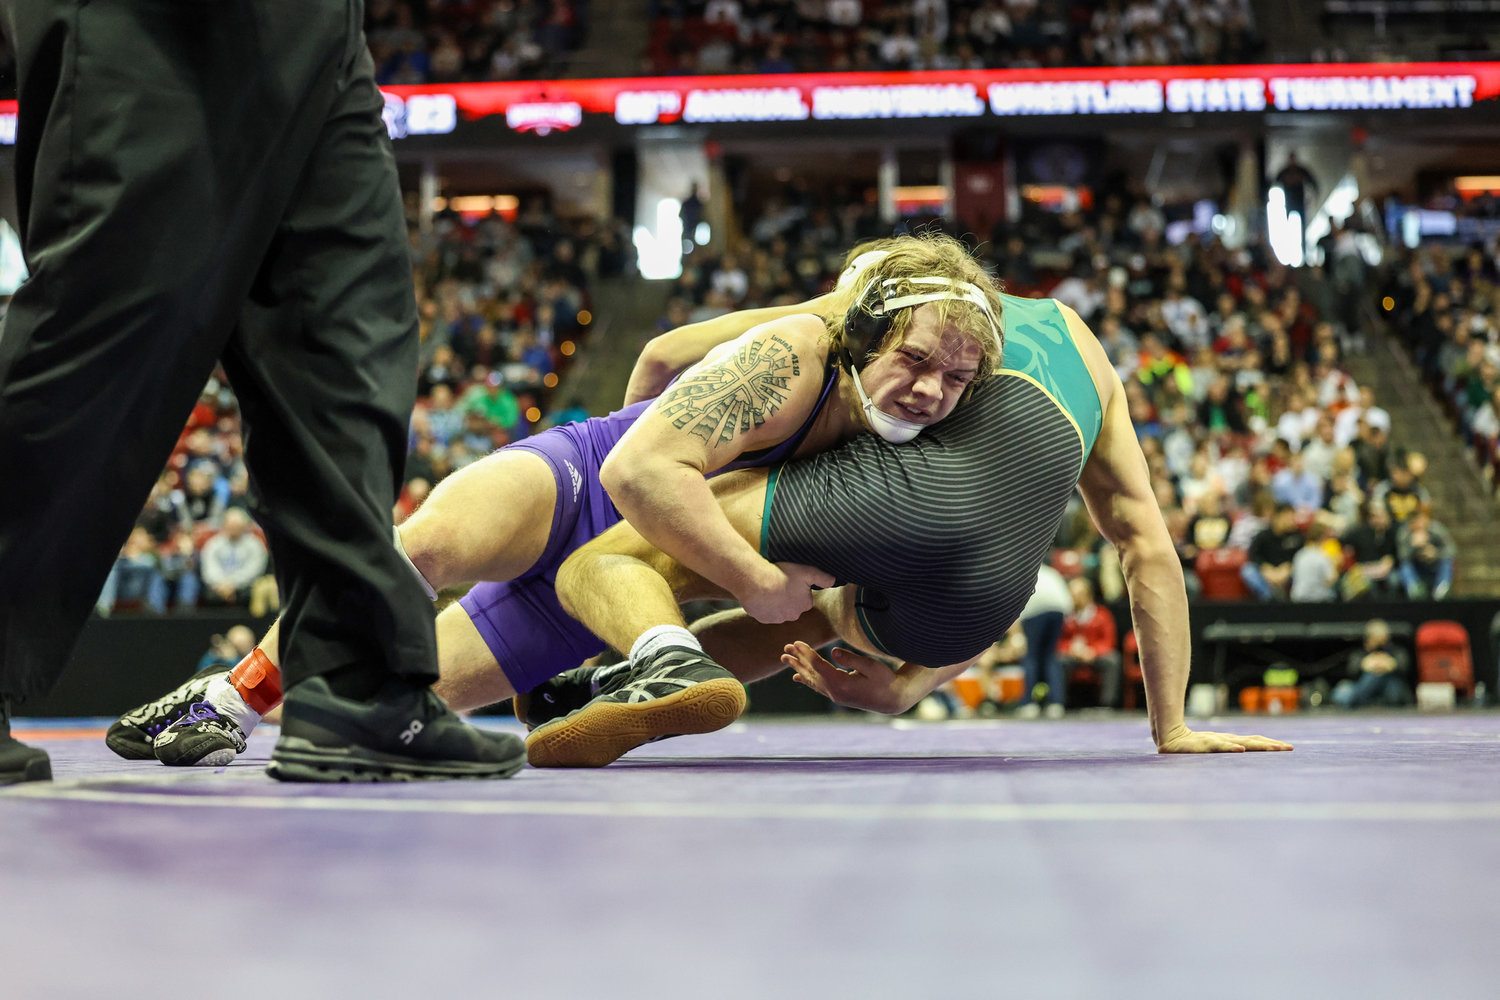 2-24-23 Ellsworth's Louis Jahnke finishes a shot against Freedom's Jack Van Rossum in a 170 pound quarterfinal match Friday morning at the WIAA state wrestling tournament. Jahnke finished fourth overall at 170...Nate Beier/GX3 Media